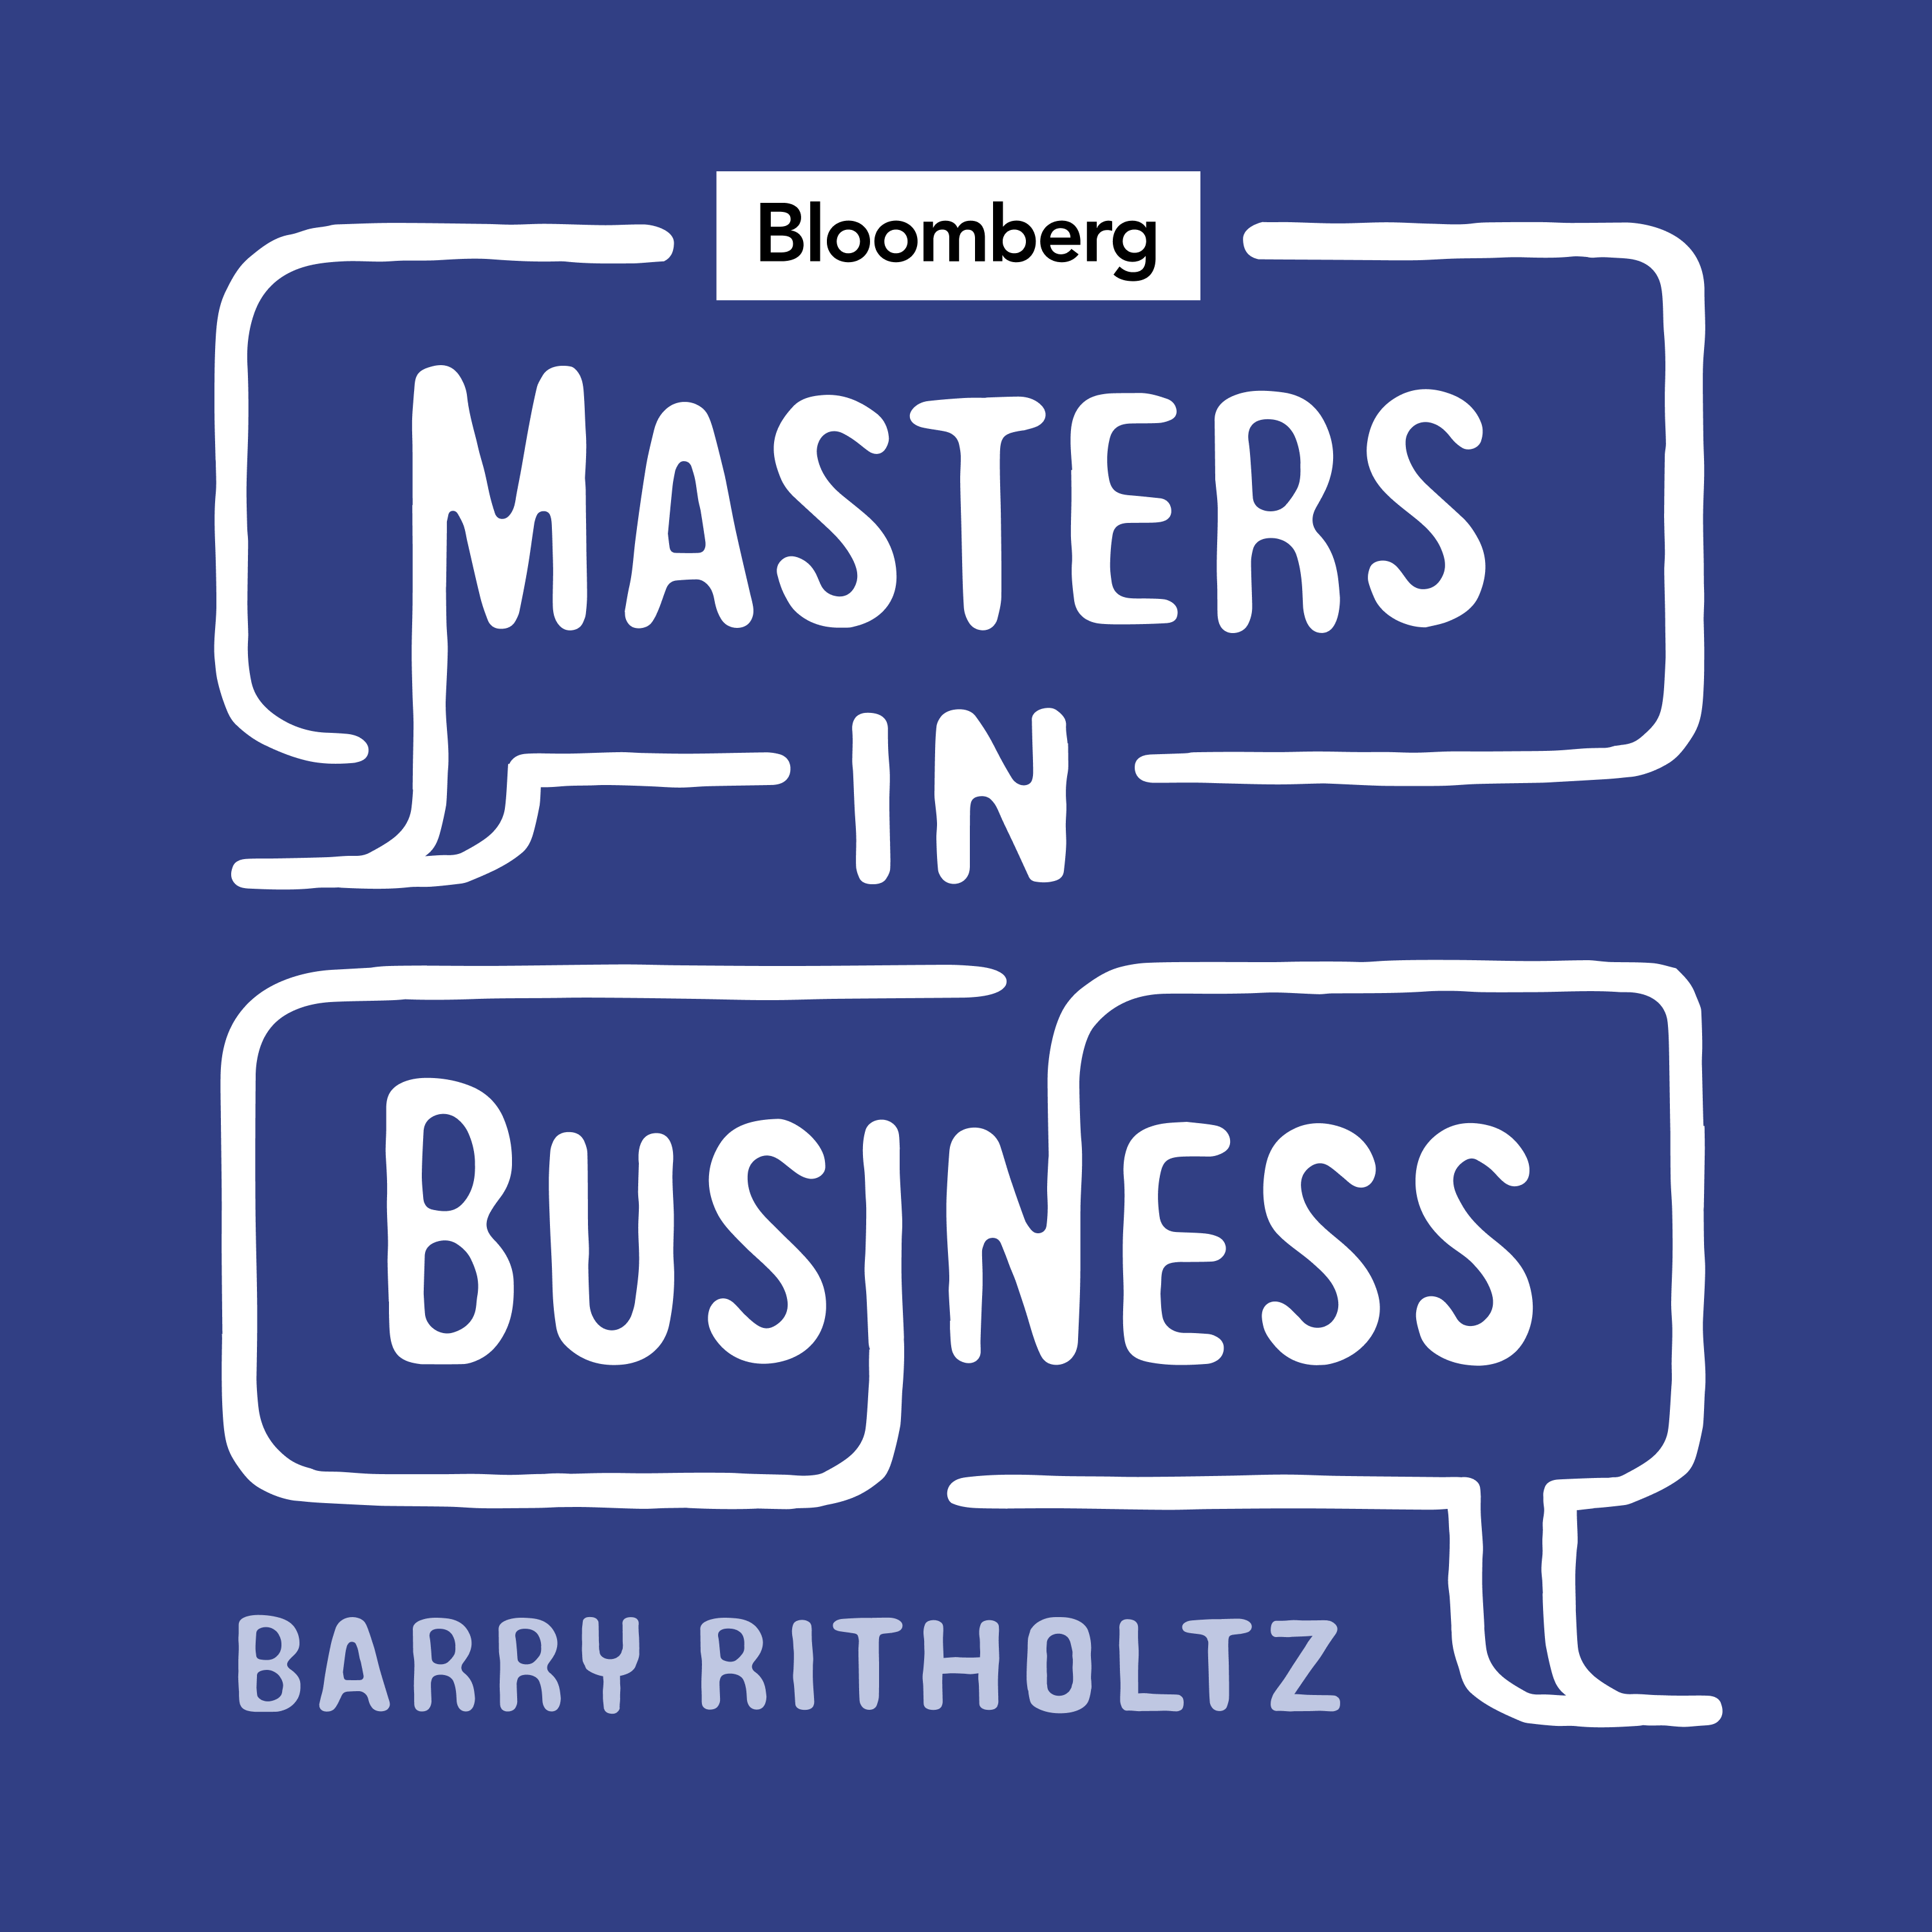 Masters in Business: Janus Capital Group Bill Gross (Audio)